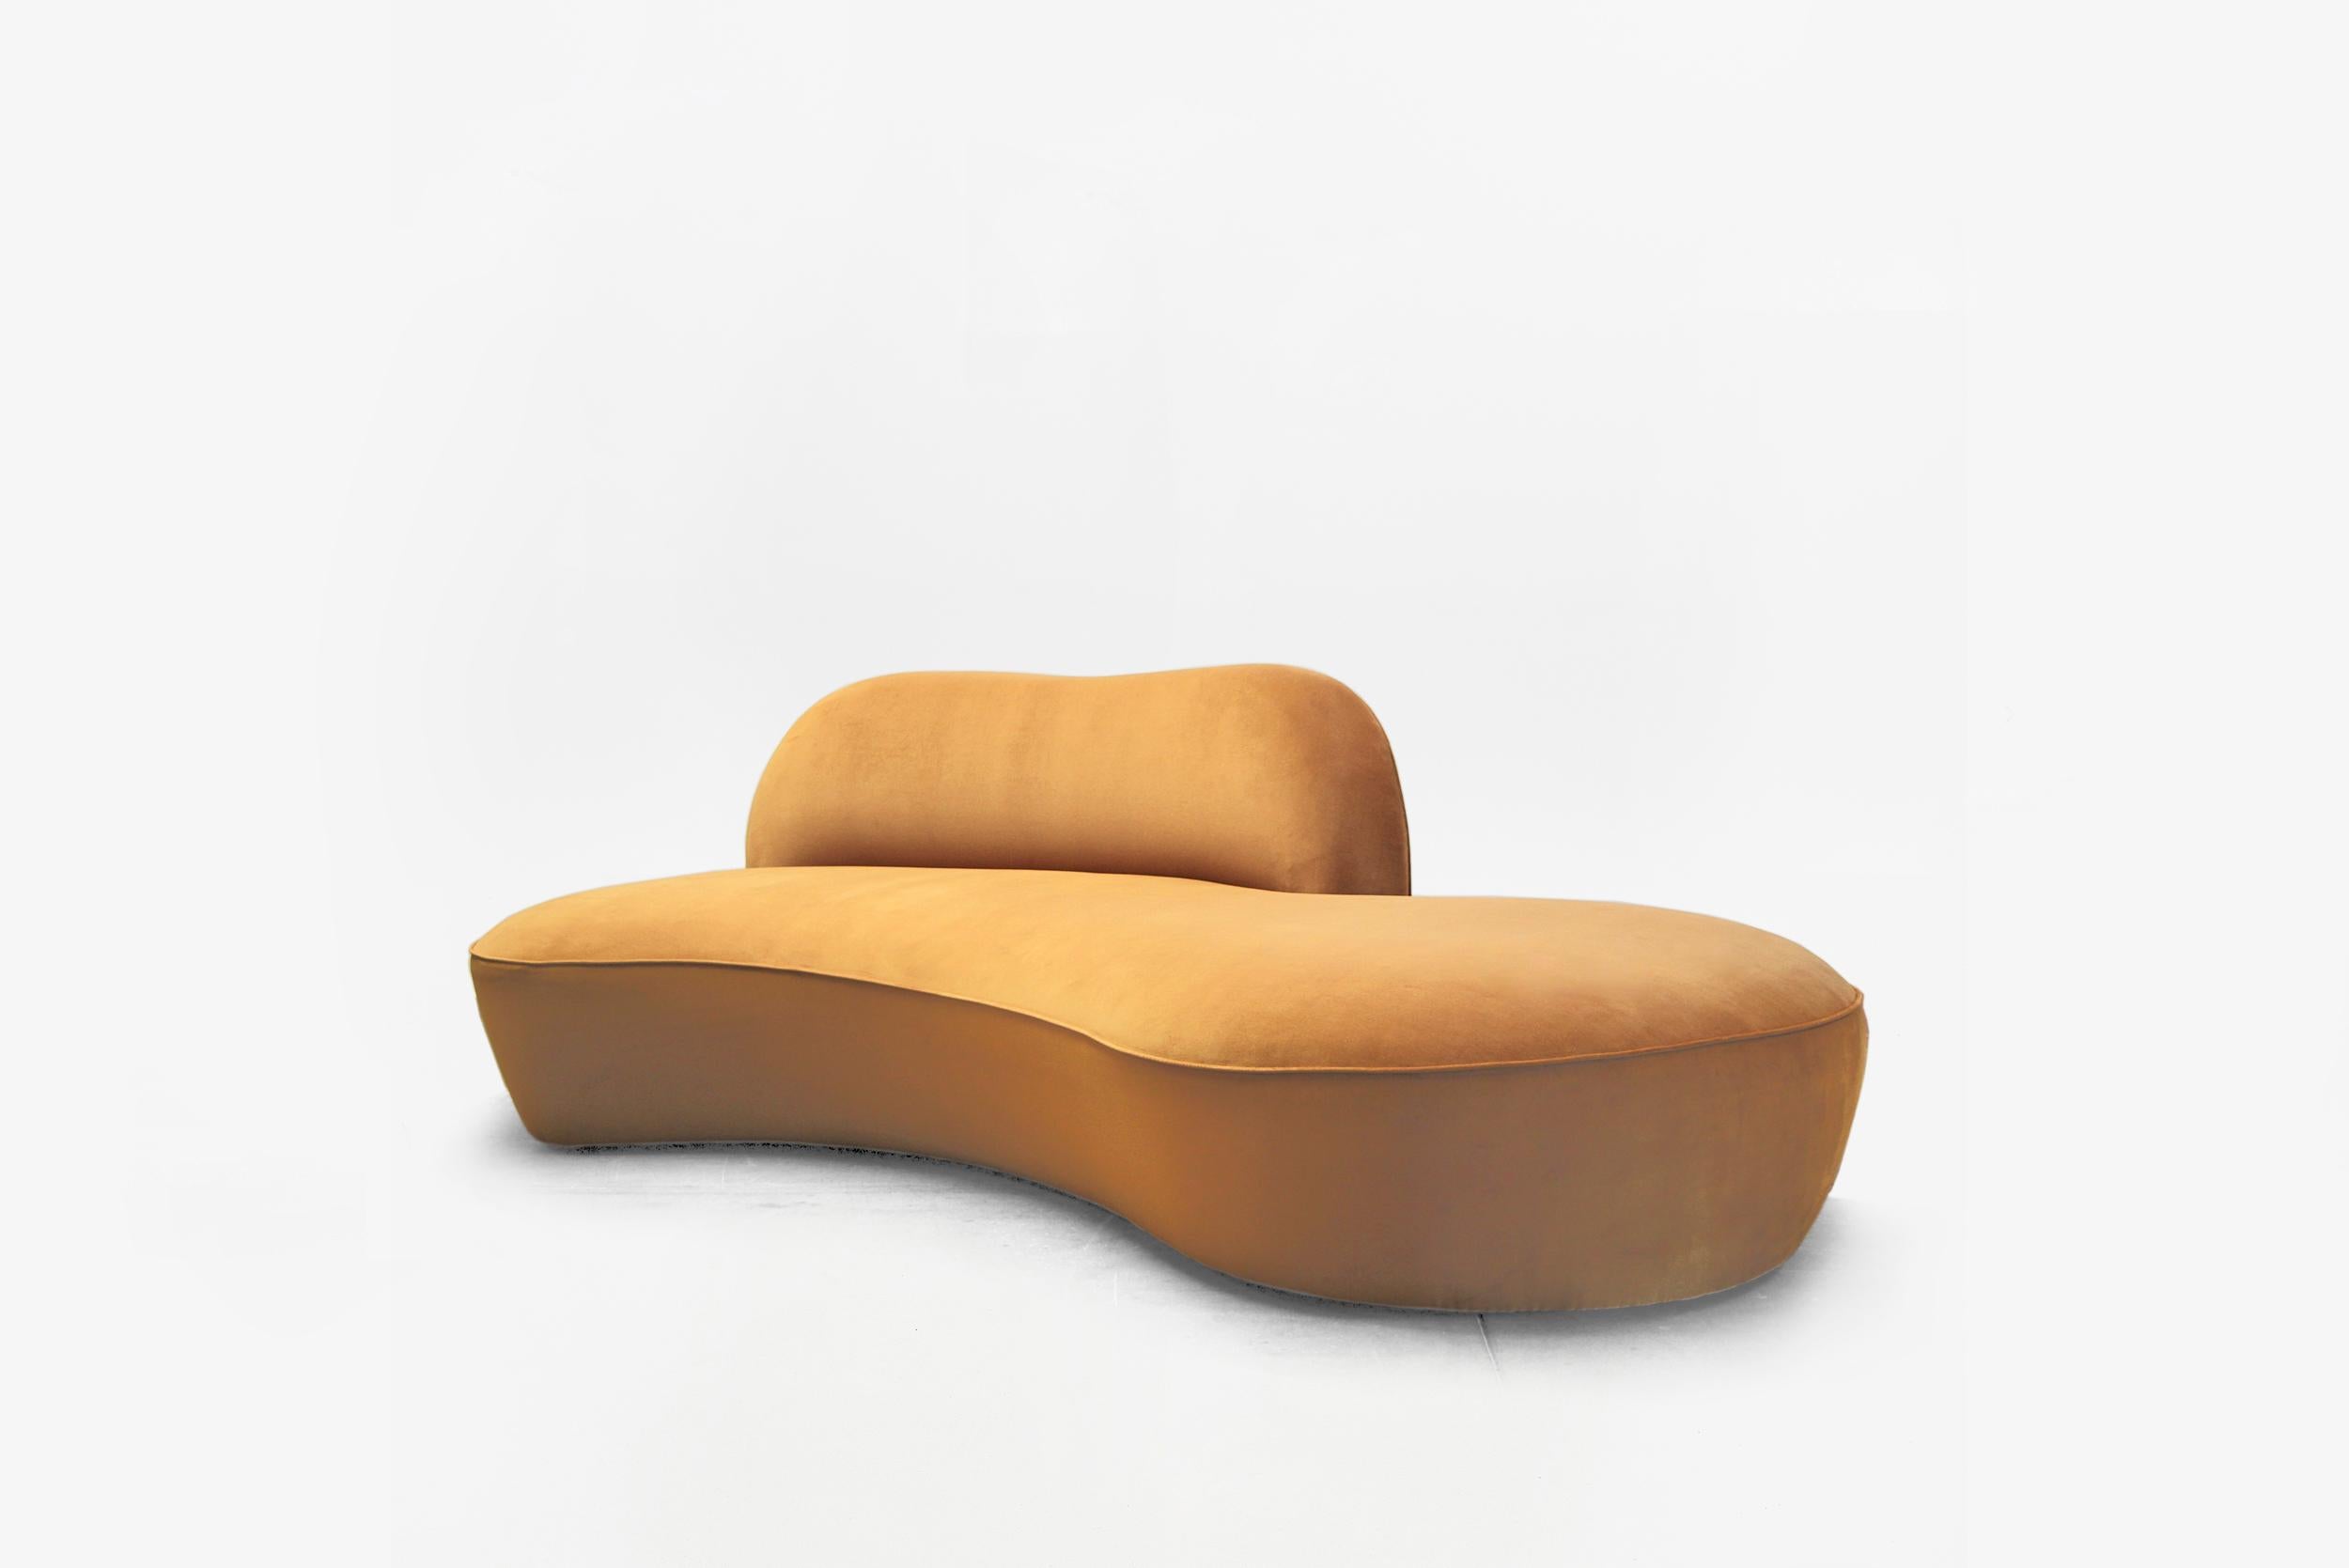 Vladimir Kagan
Sofa model “Directional”
Manufactured by Vladimir Kagan Designs, Inc.
United States
Upholstery, walnut


Measurements
244 cm x 147 cm x 75 cm
96 in x 58 in x 29.5 in


Literature
The Complete Kagan: A Lifetime of Avant-Garde Design,